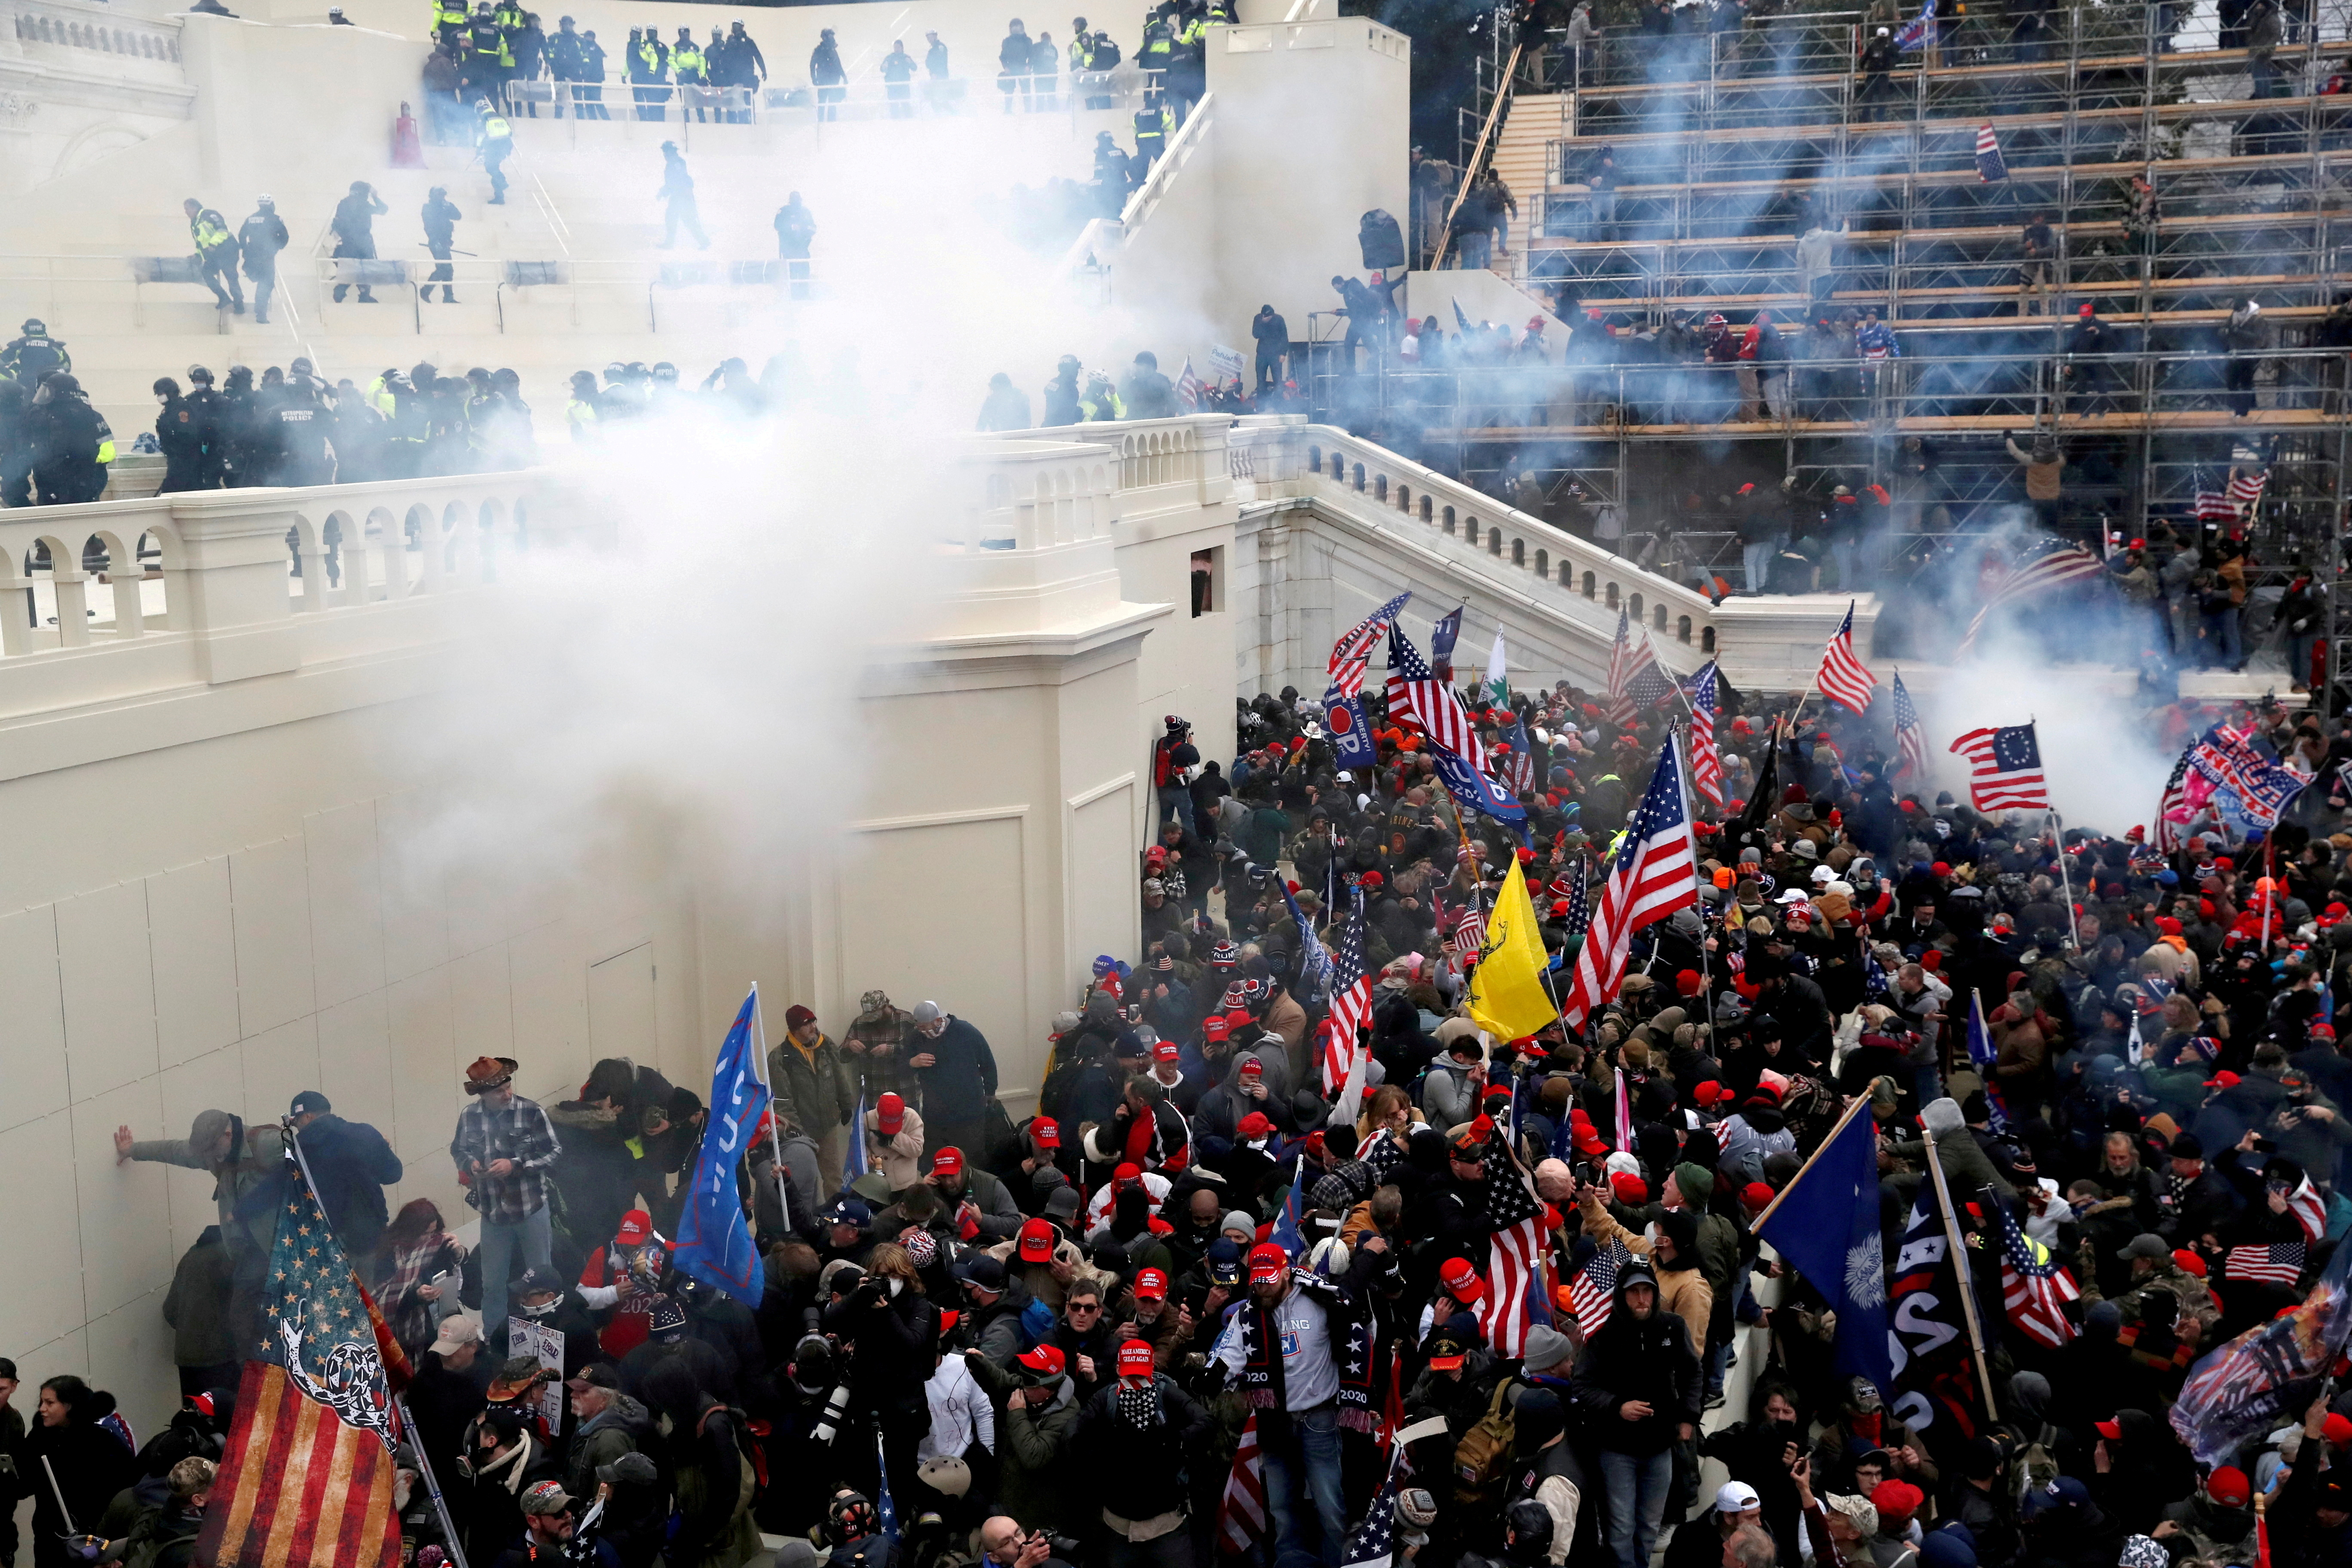 Police release tear gas into a crowd of pro-Trump protesters during clashes at a rally to contest the certification of the 2020 U.S. presidential election results by the U.S. Congress, at the U.S. Capitol Building in Washington, U.S, January 6, 2021. REUTERS/Shannon Stapleton//File Photo